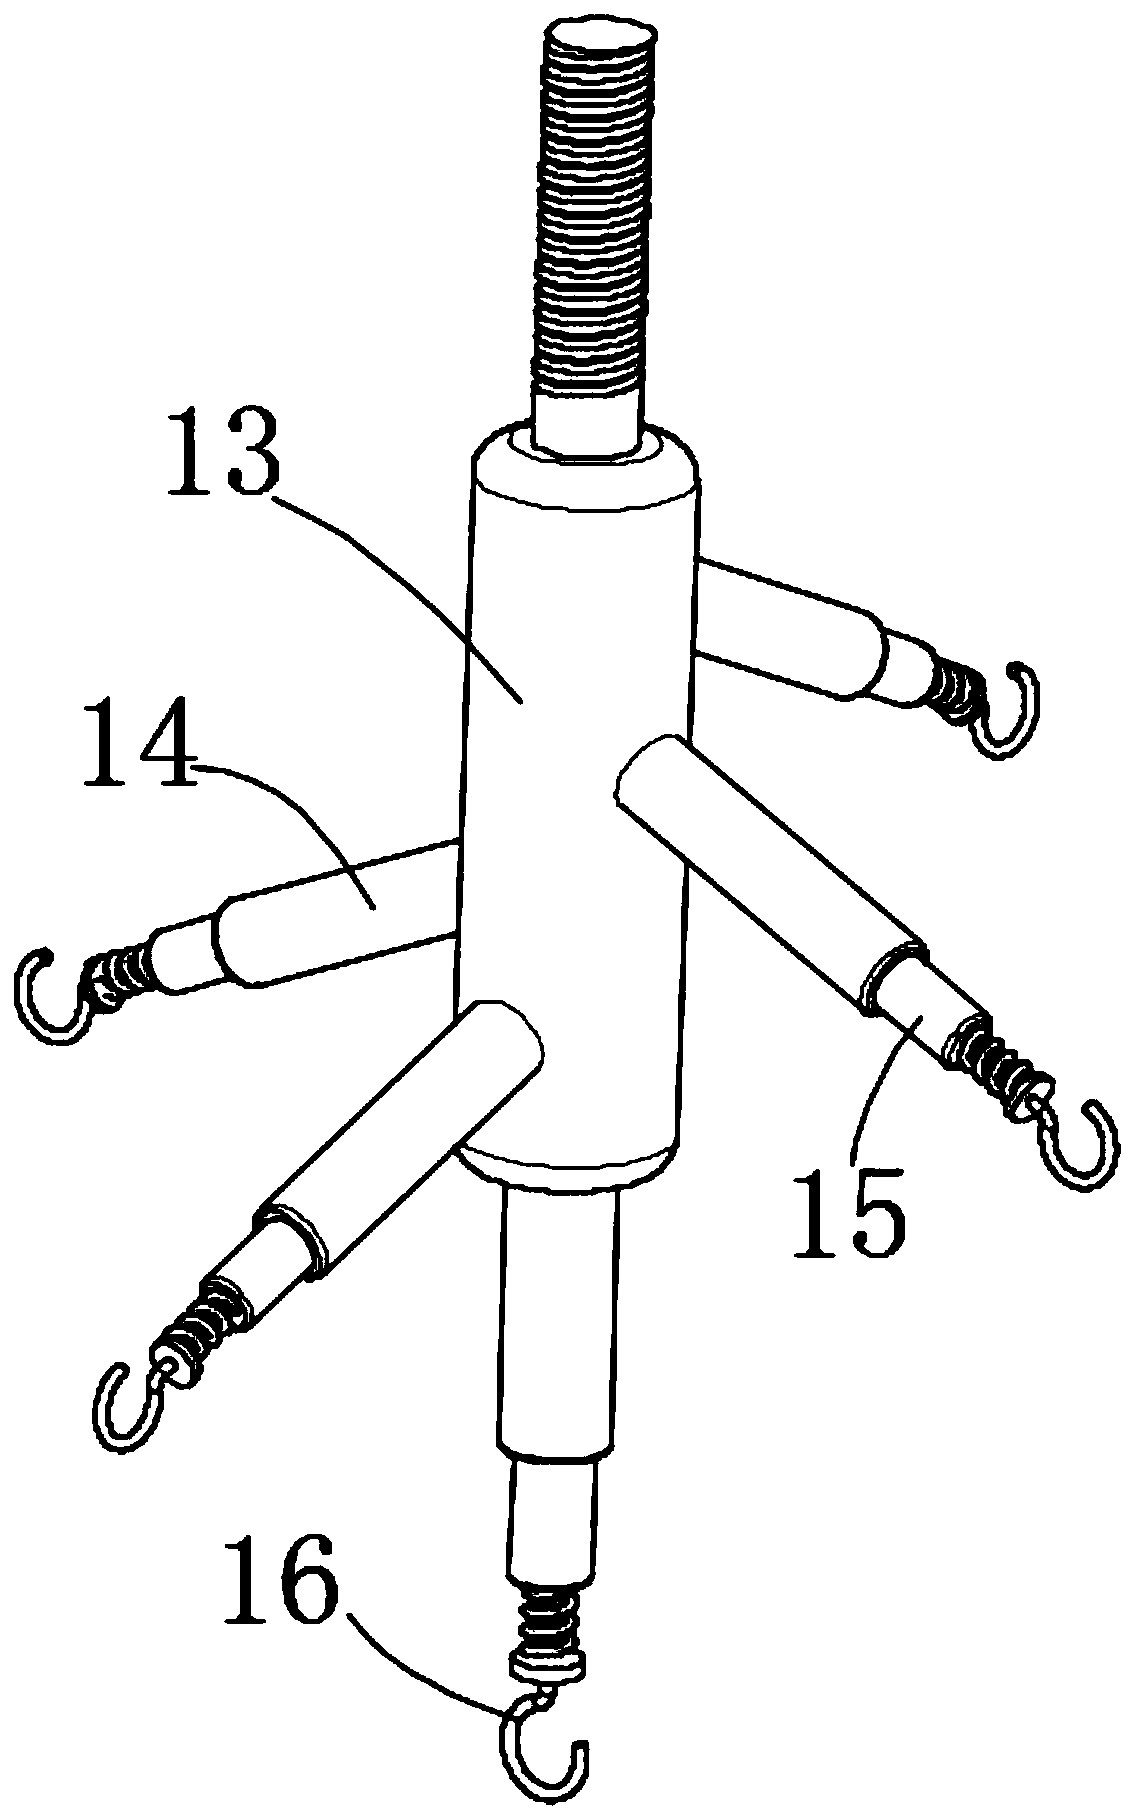 A neurosurgical retractor fixation device